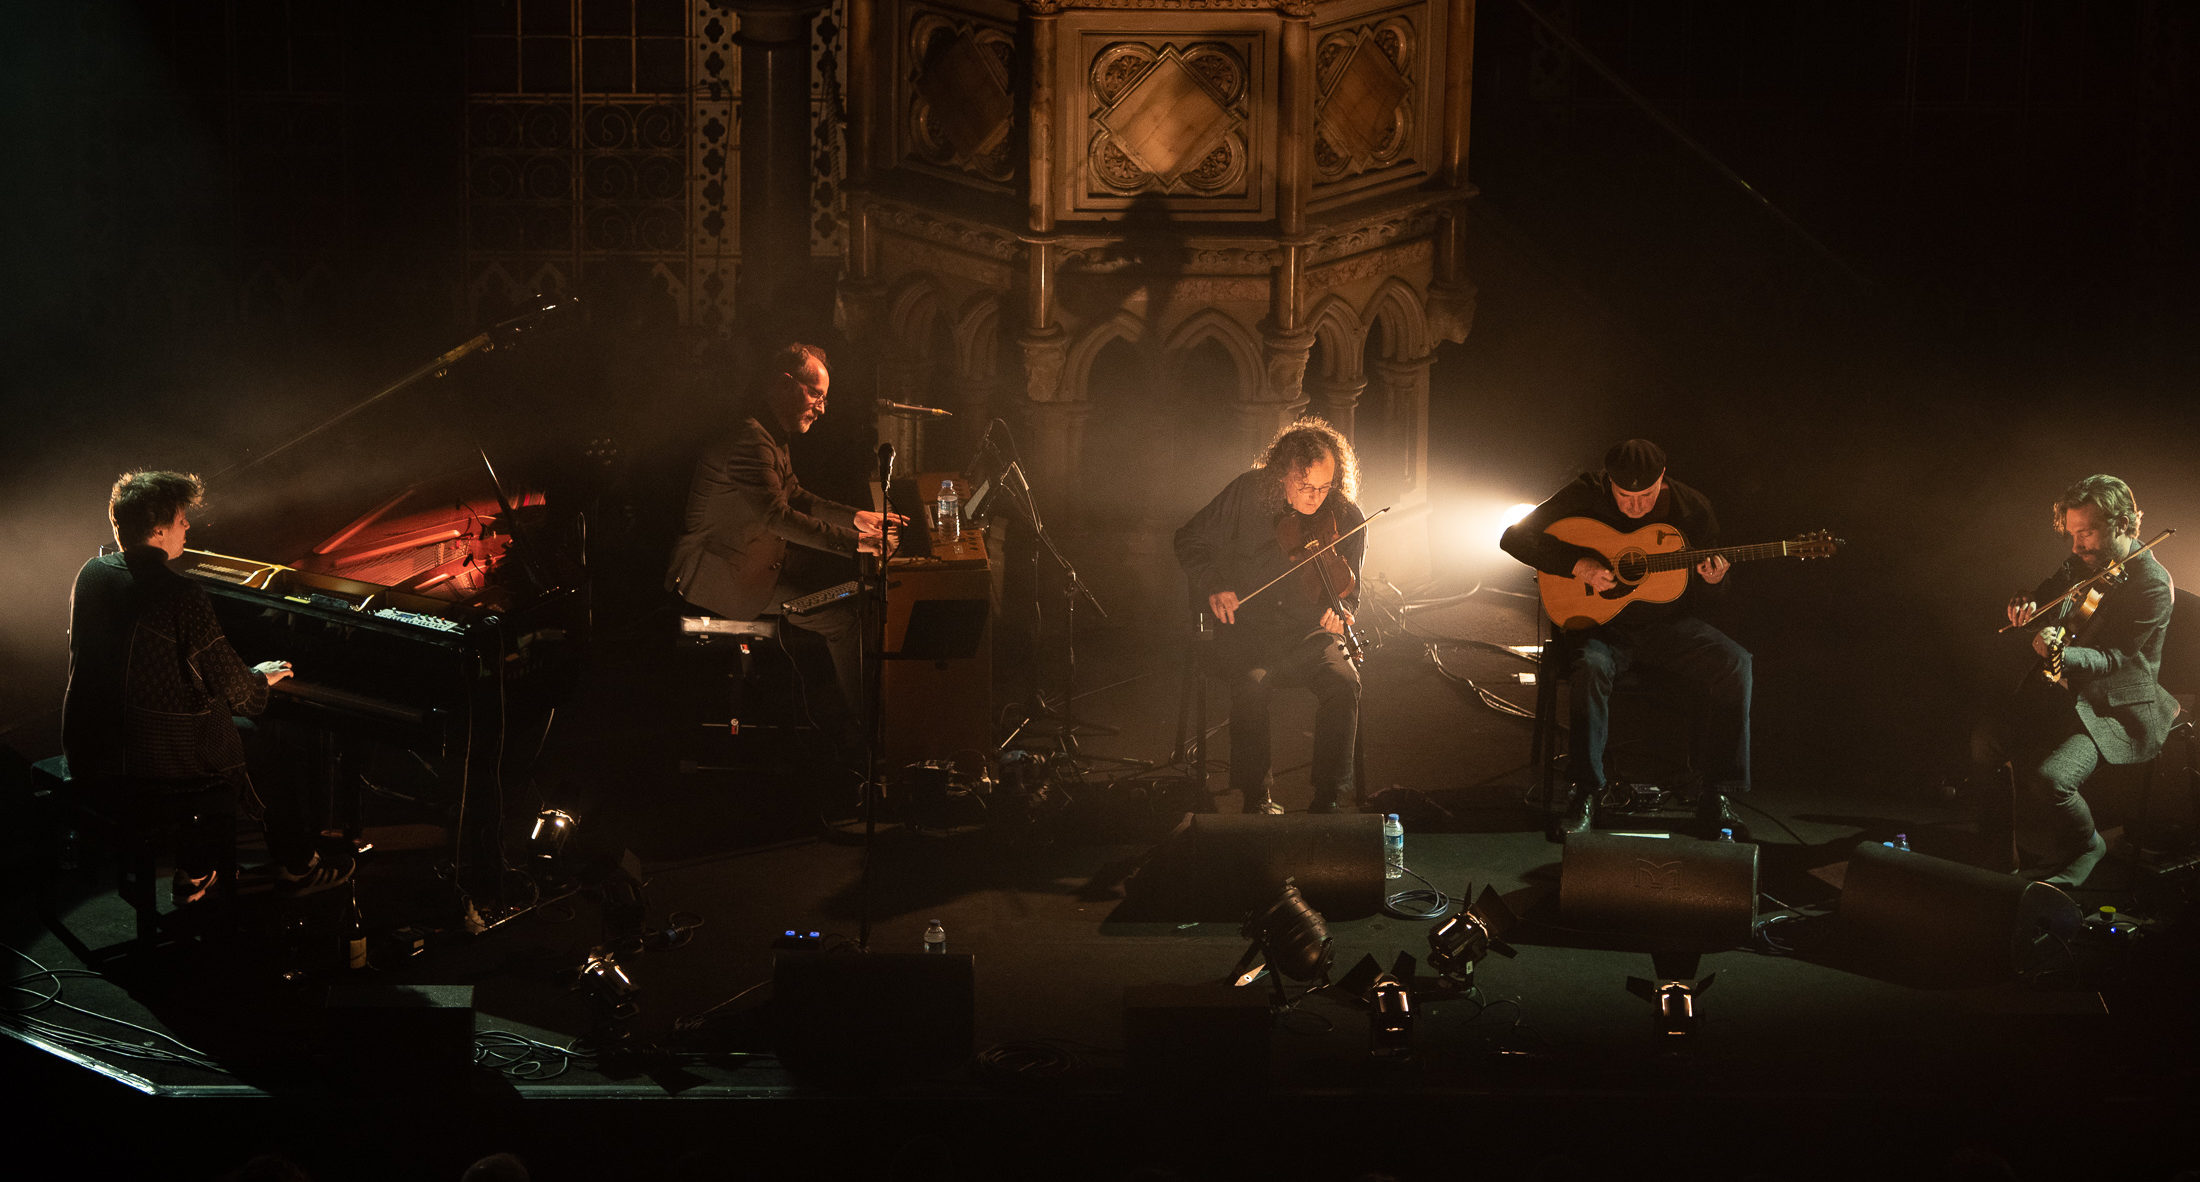 The Gloaming at Union Chapel, London